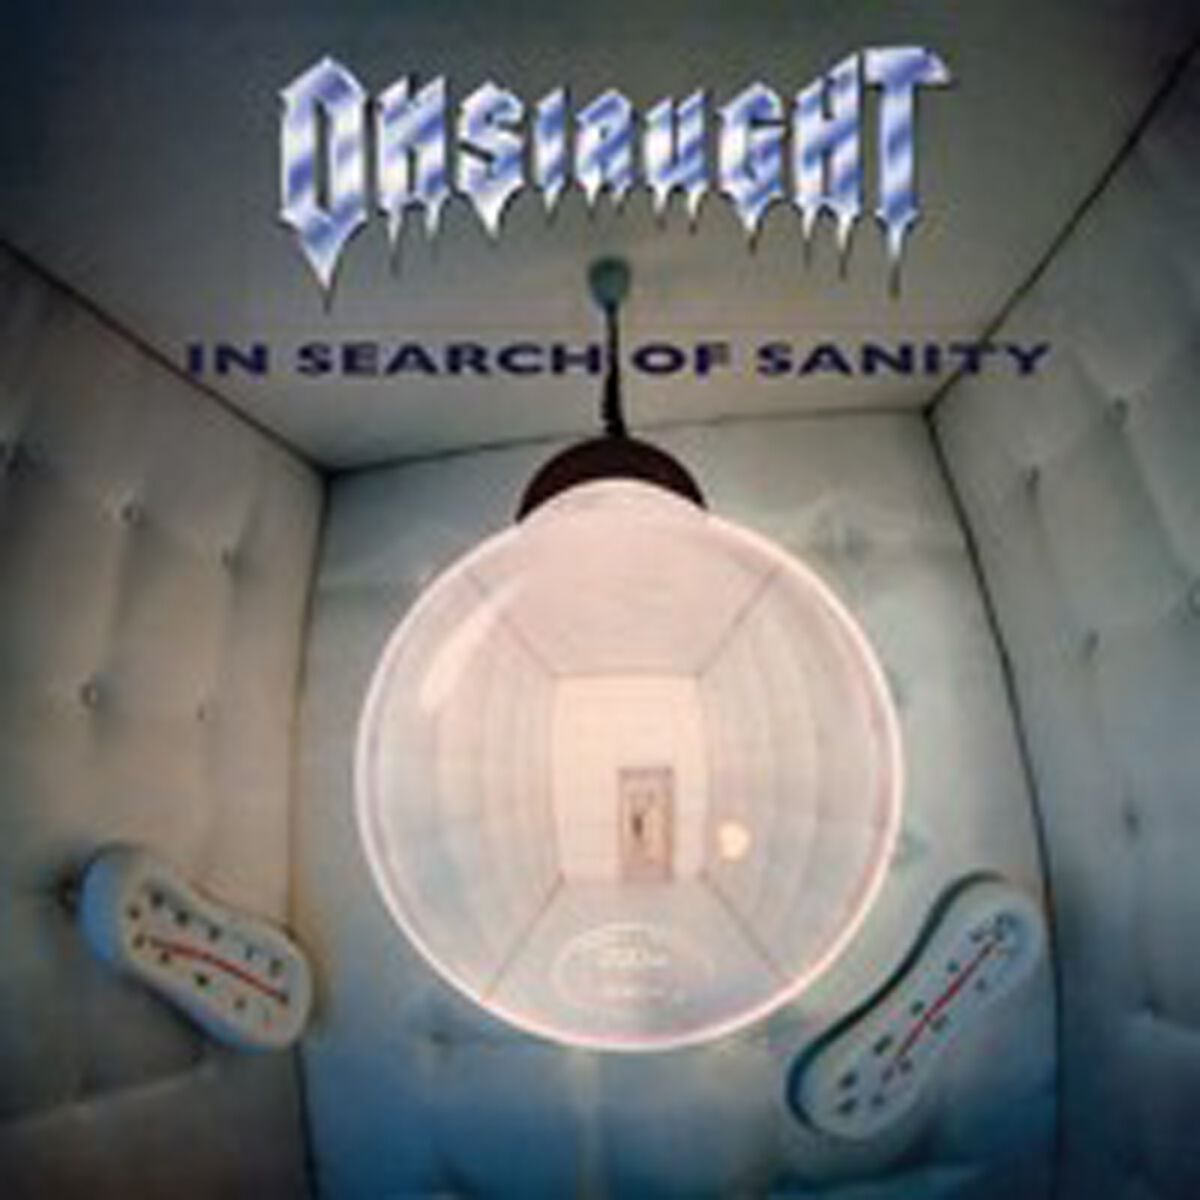 Onslaught In search of sanity CD multicolor